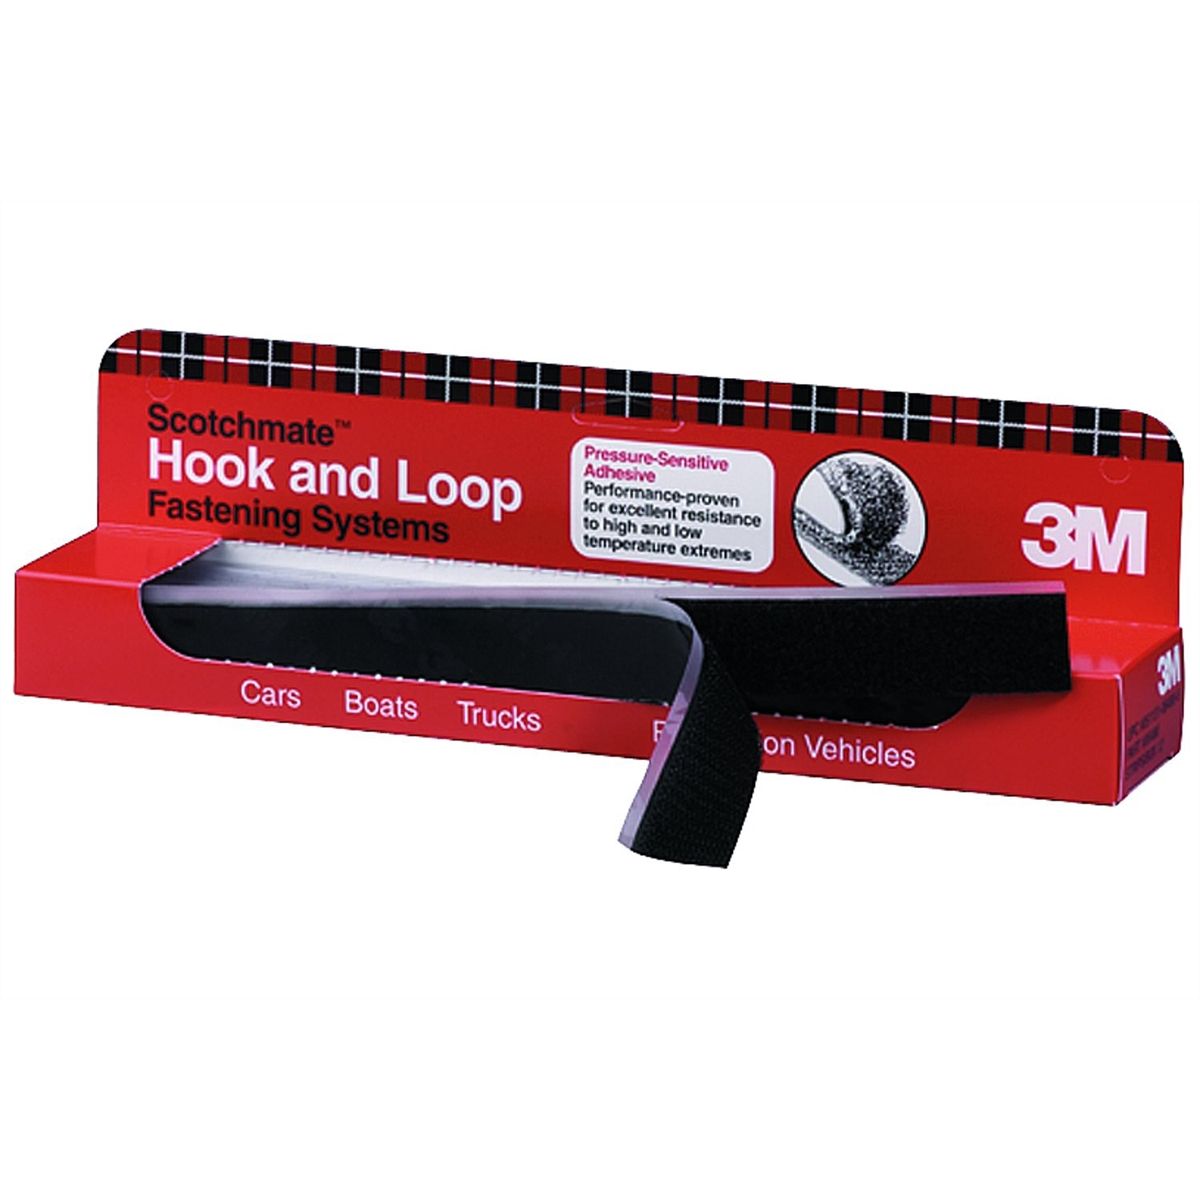 Scotchmate Hook and Loop Fastening System